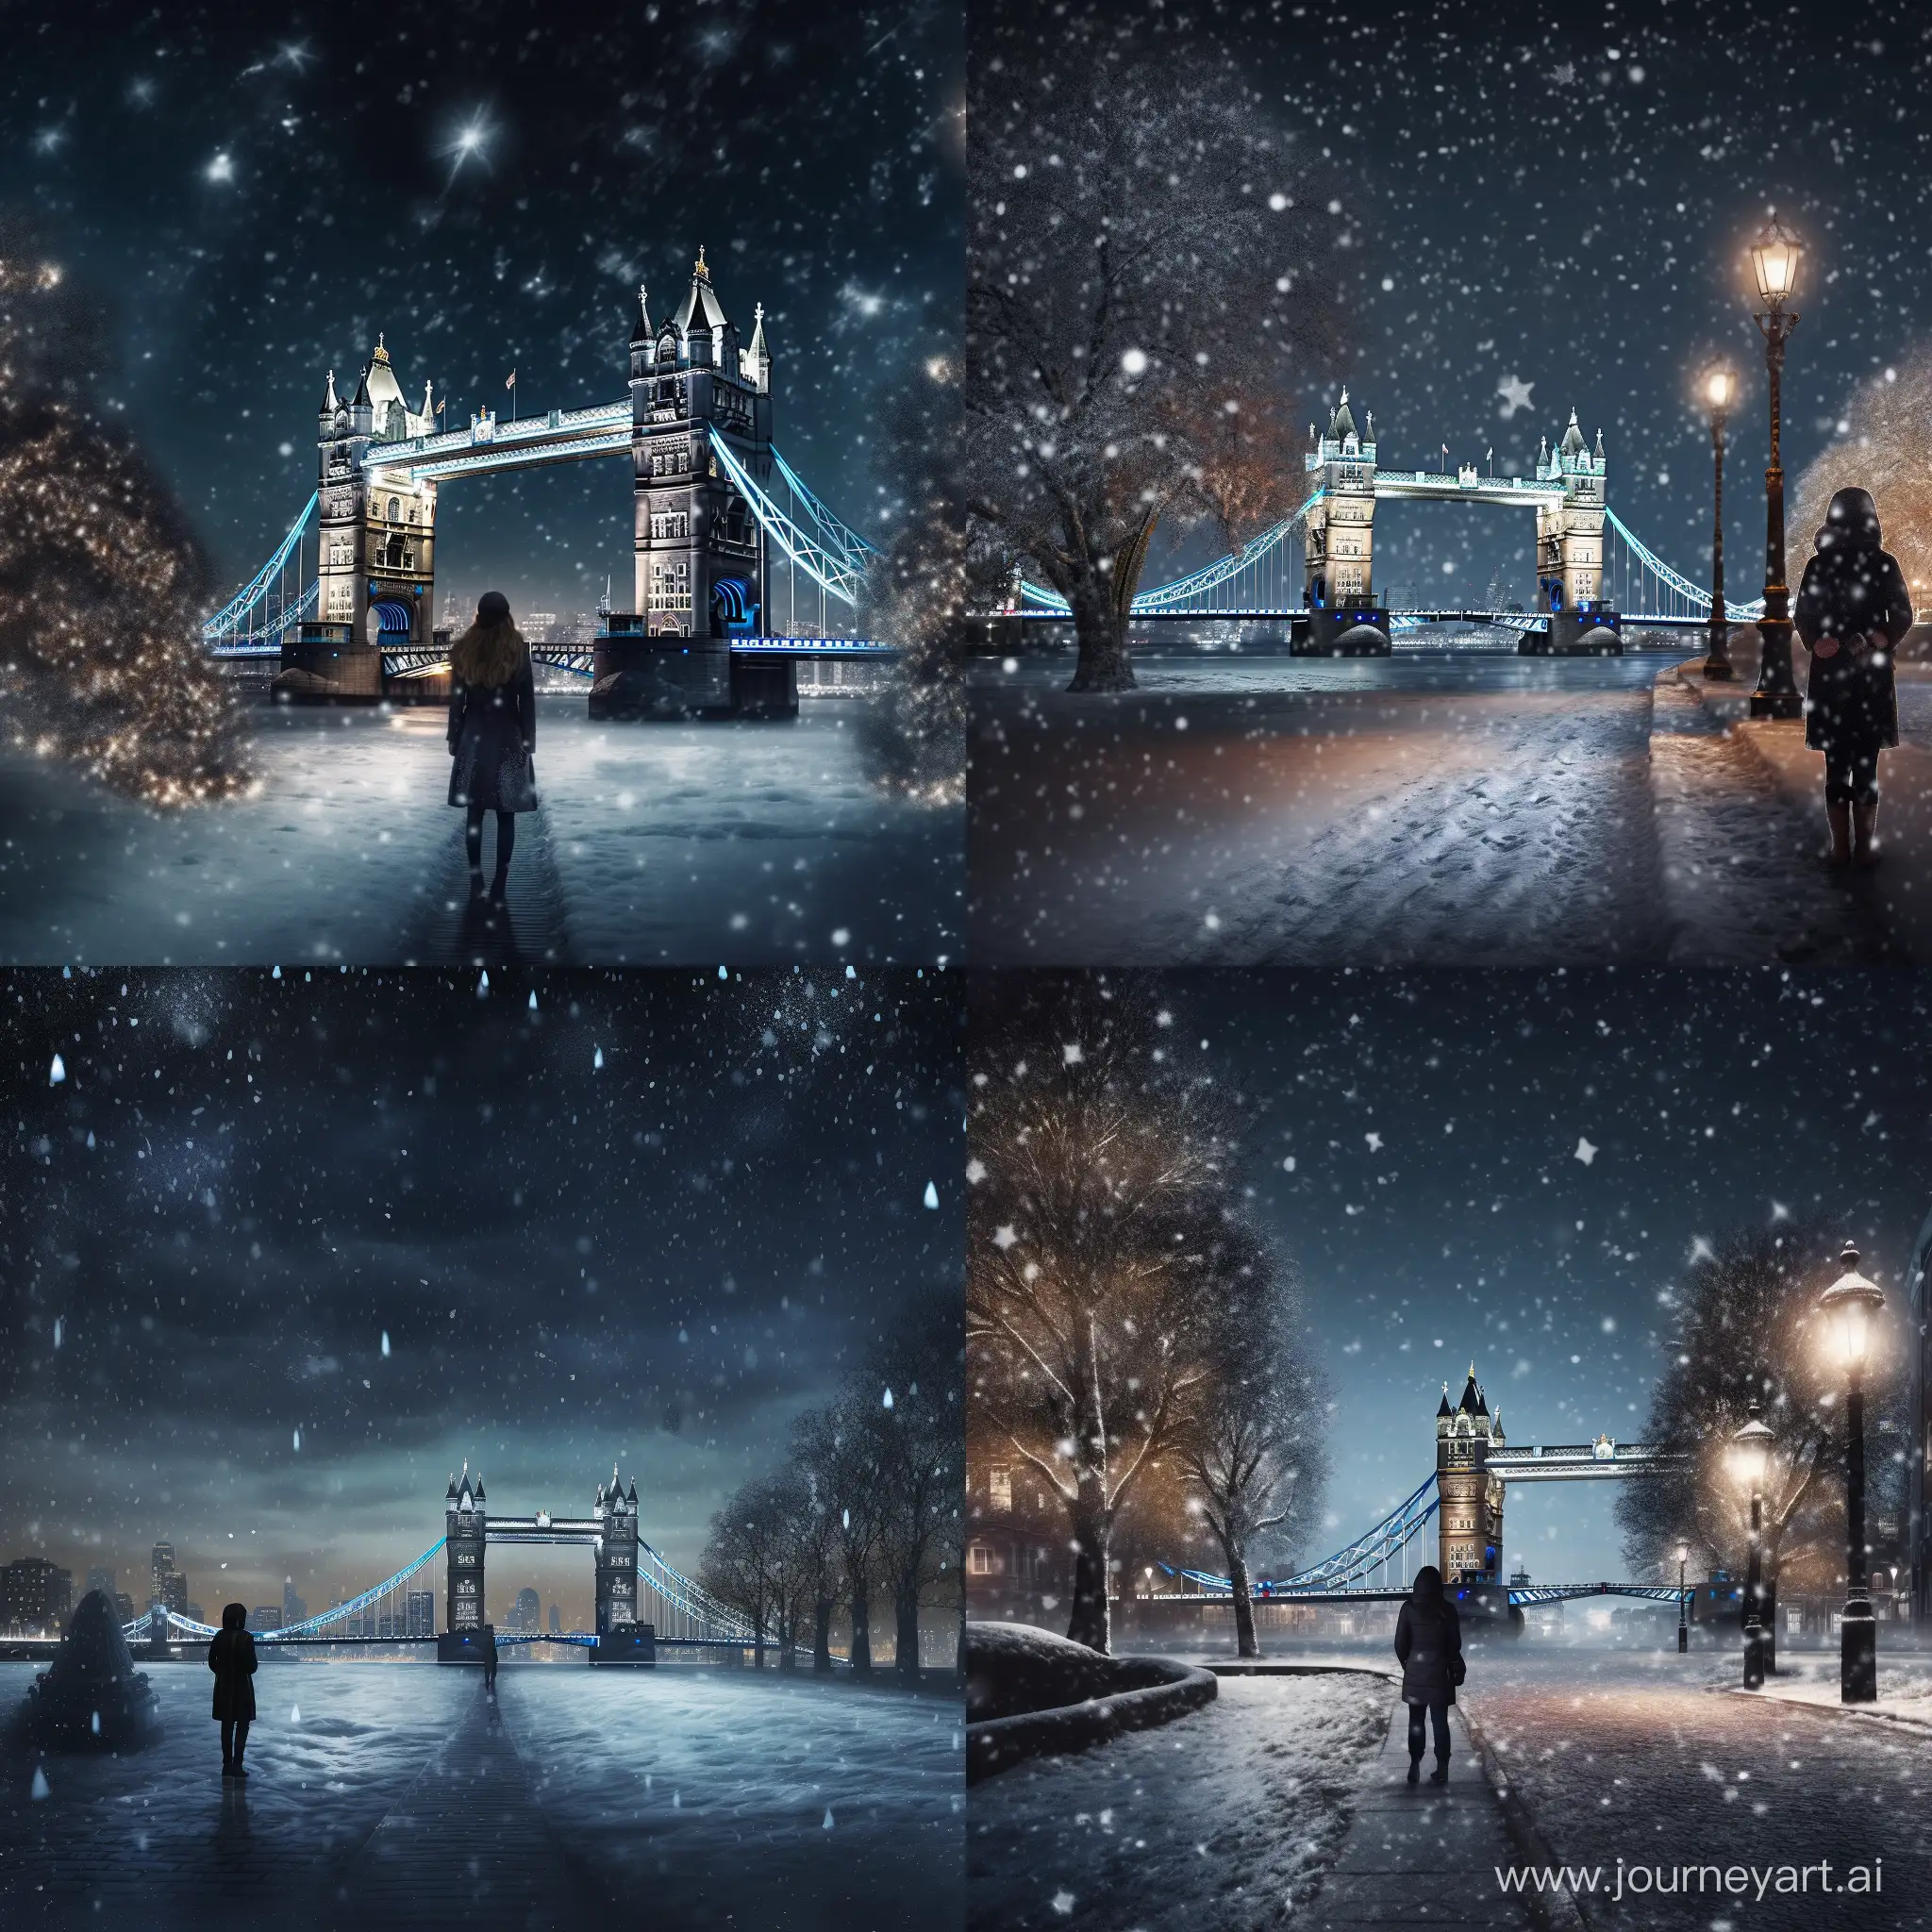 It's a snowy night in London. A woman with long brown hair is standing near Tower Bridge, wearing black sportswear. She stands alone with her hood up, and there are no other people around. In the distance, the illuminated Tower Bridge adds to the serene atmosphere.